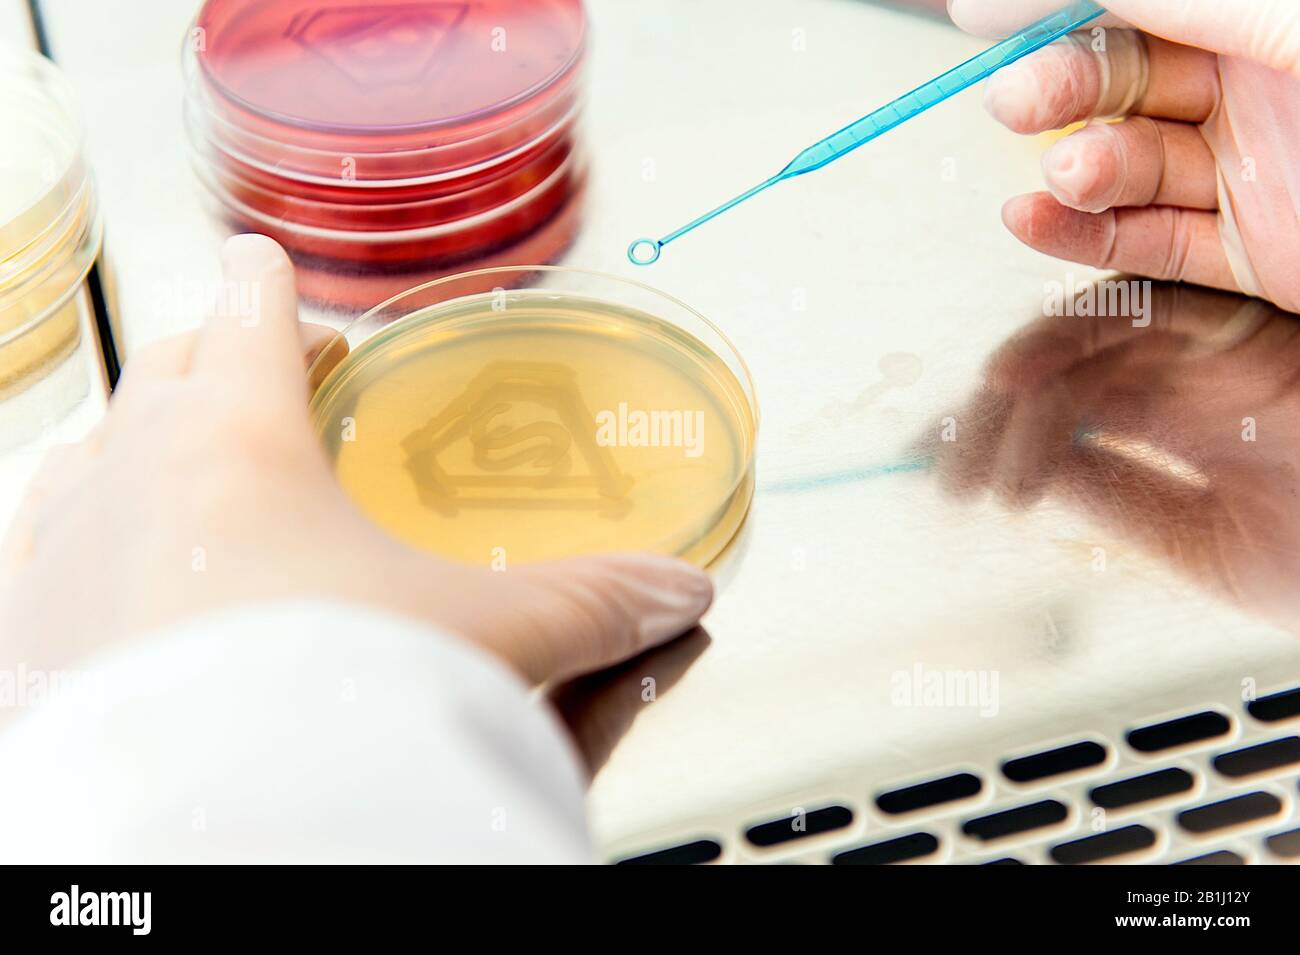 bacterial culture in shape of letter s Stock Photo